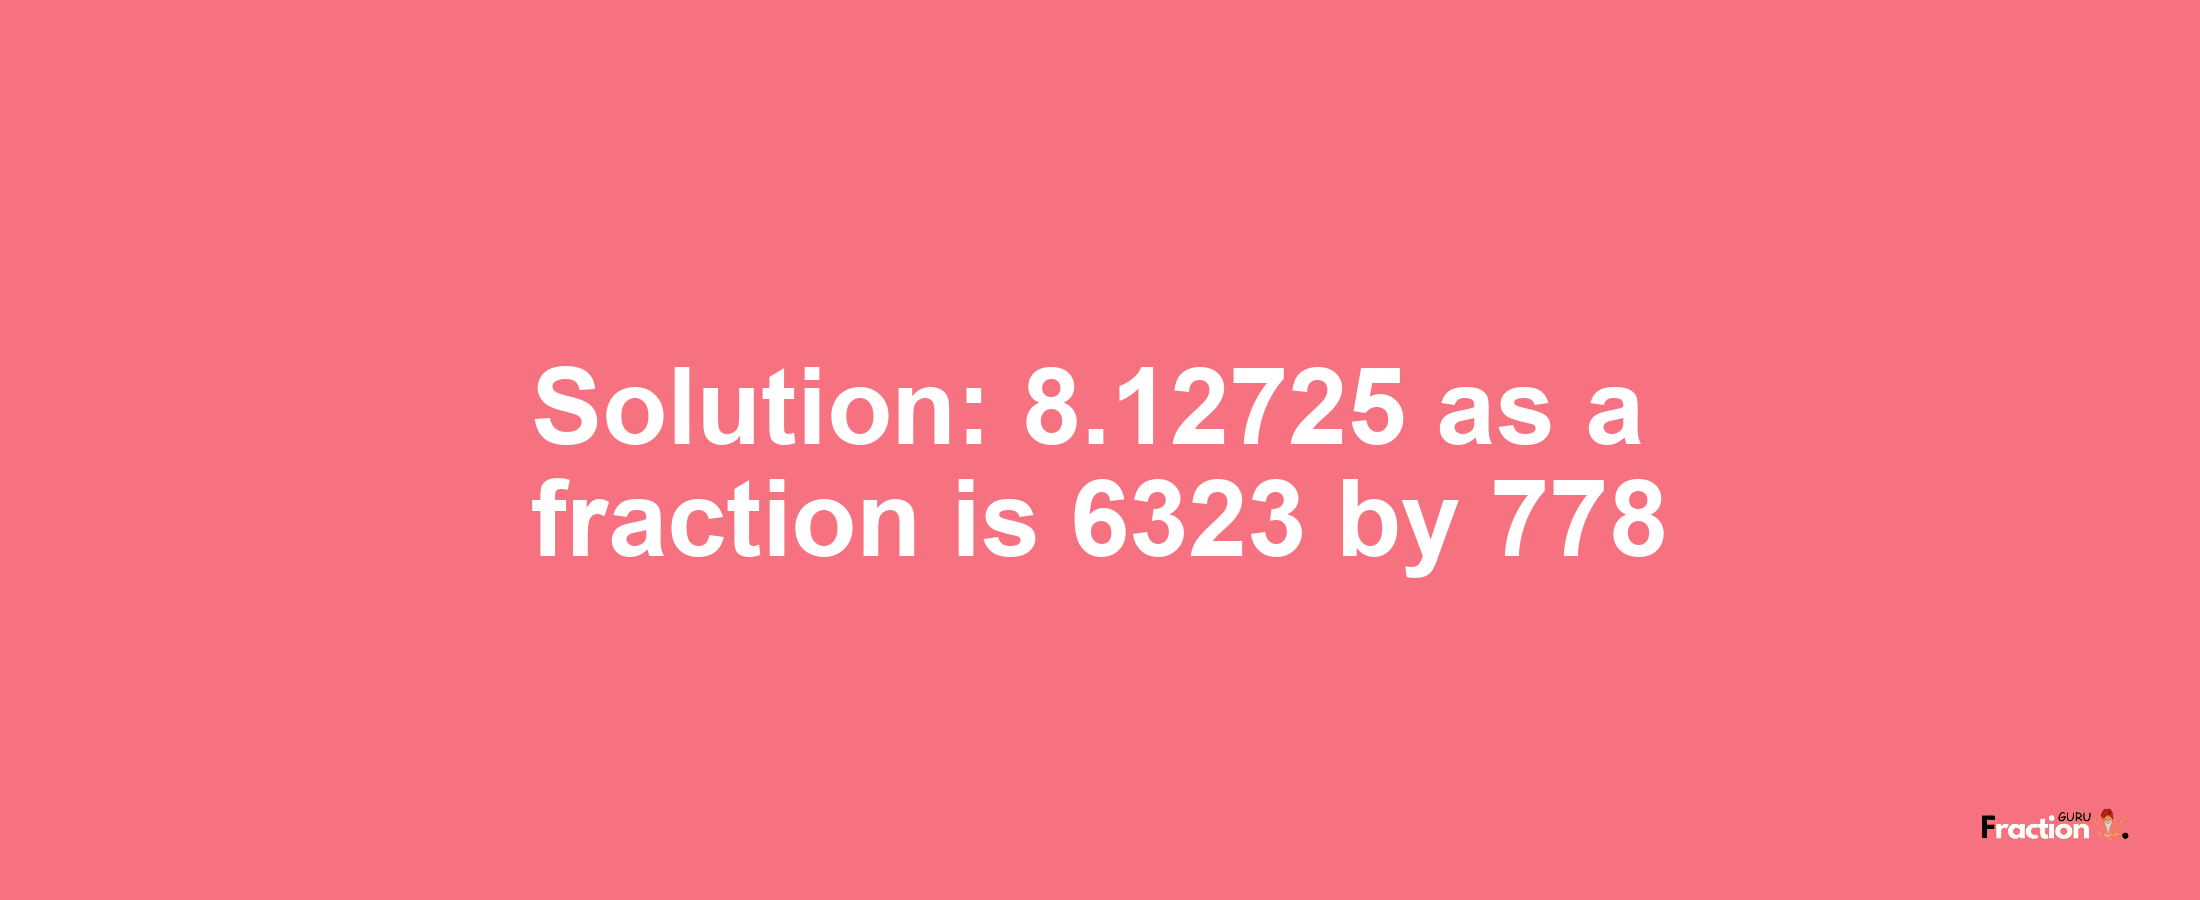 Solution:8.12725 as a fraction is 6323/778